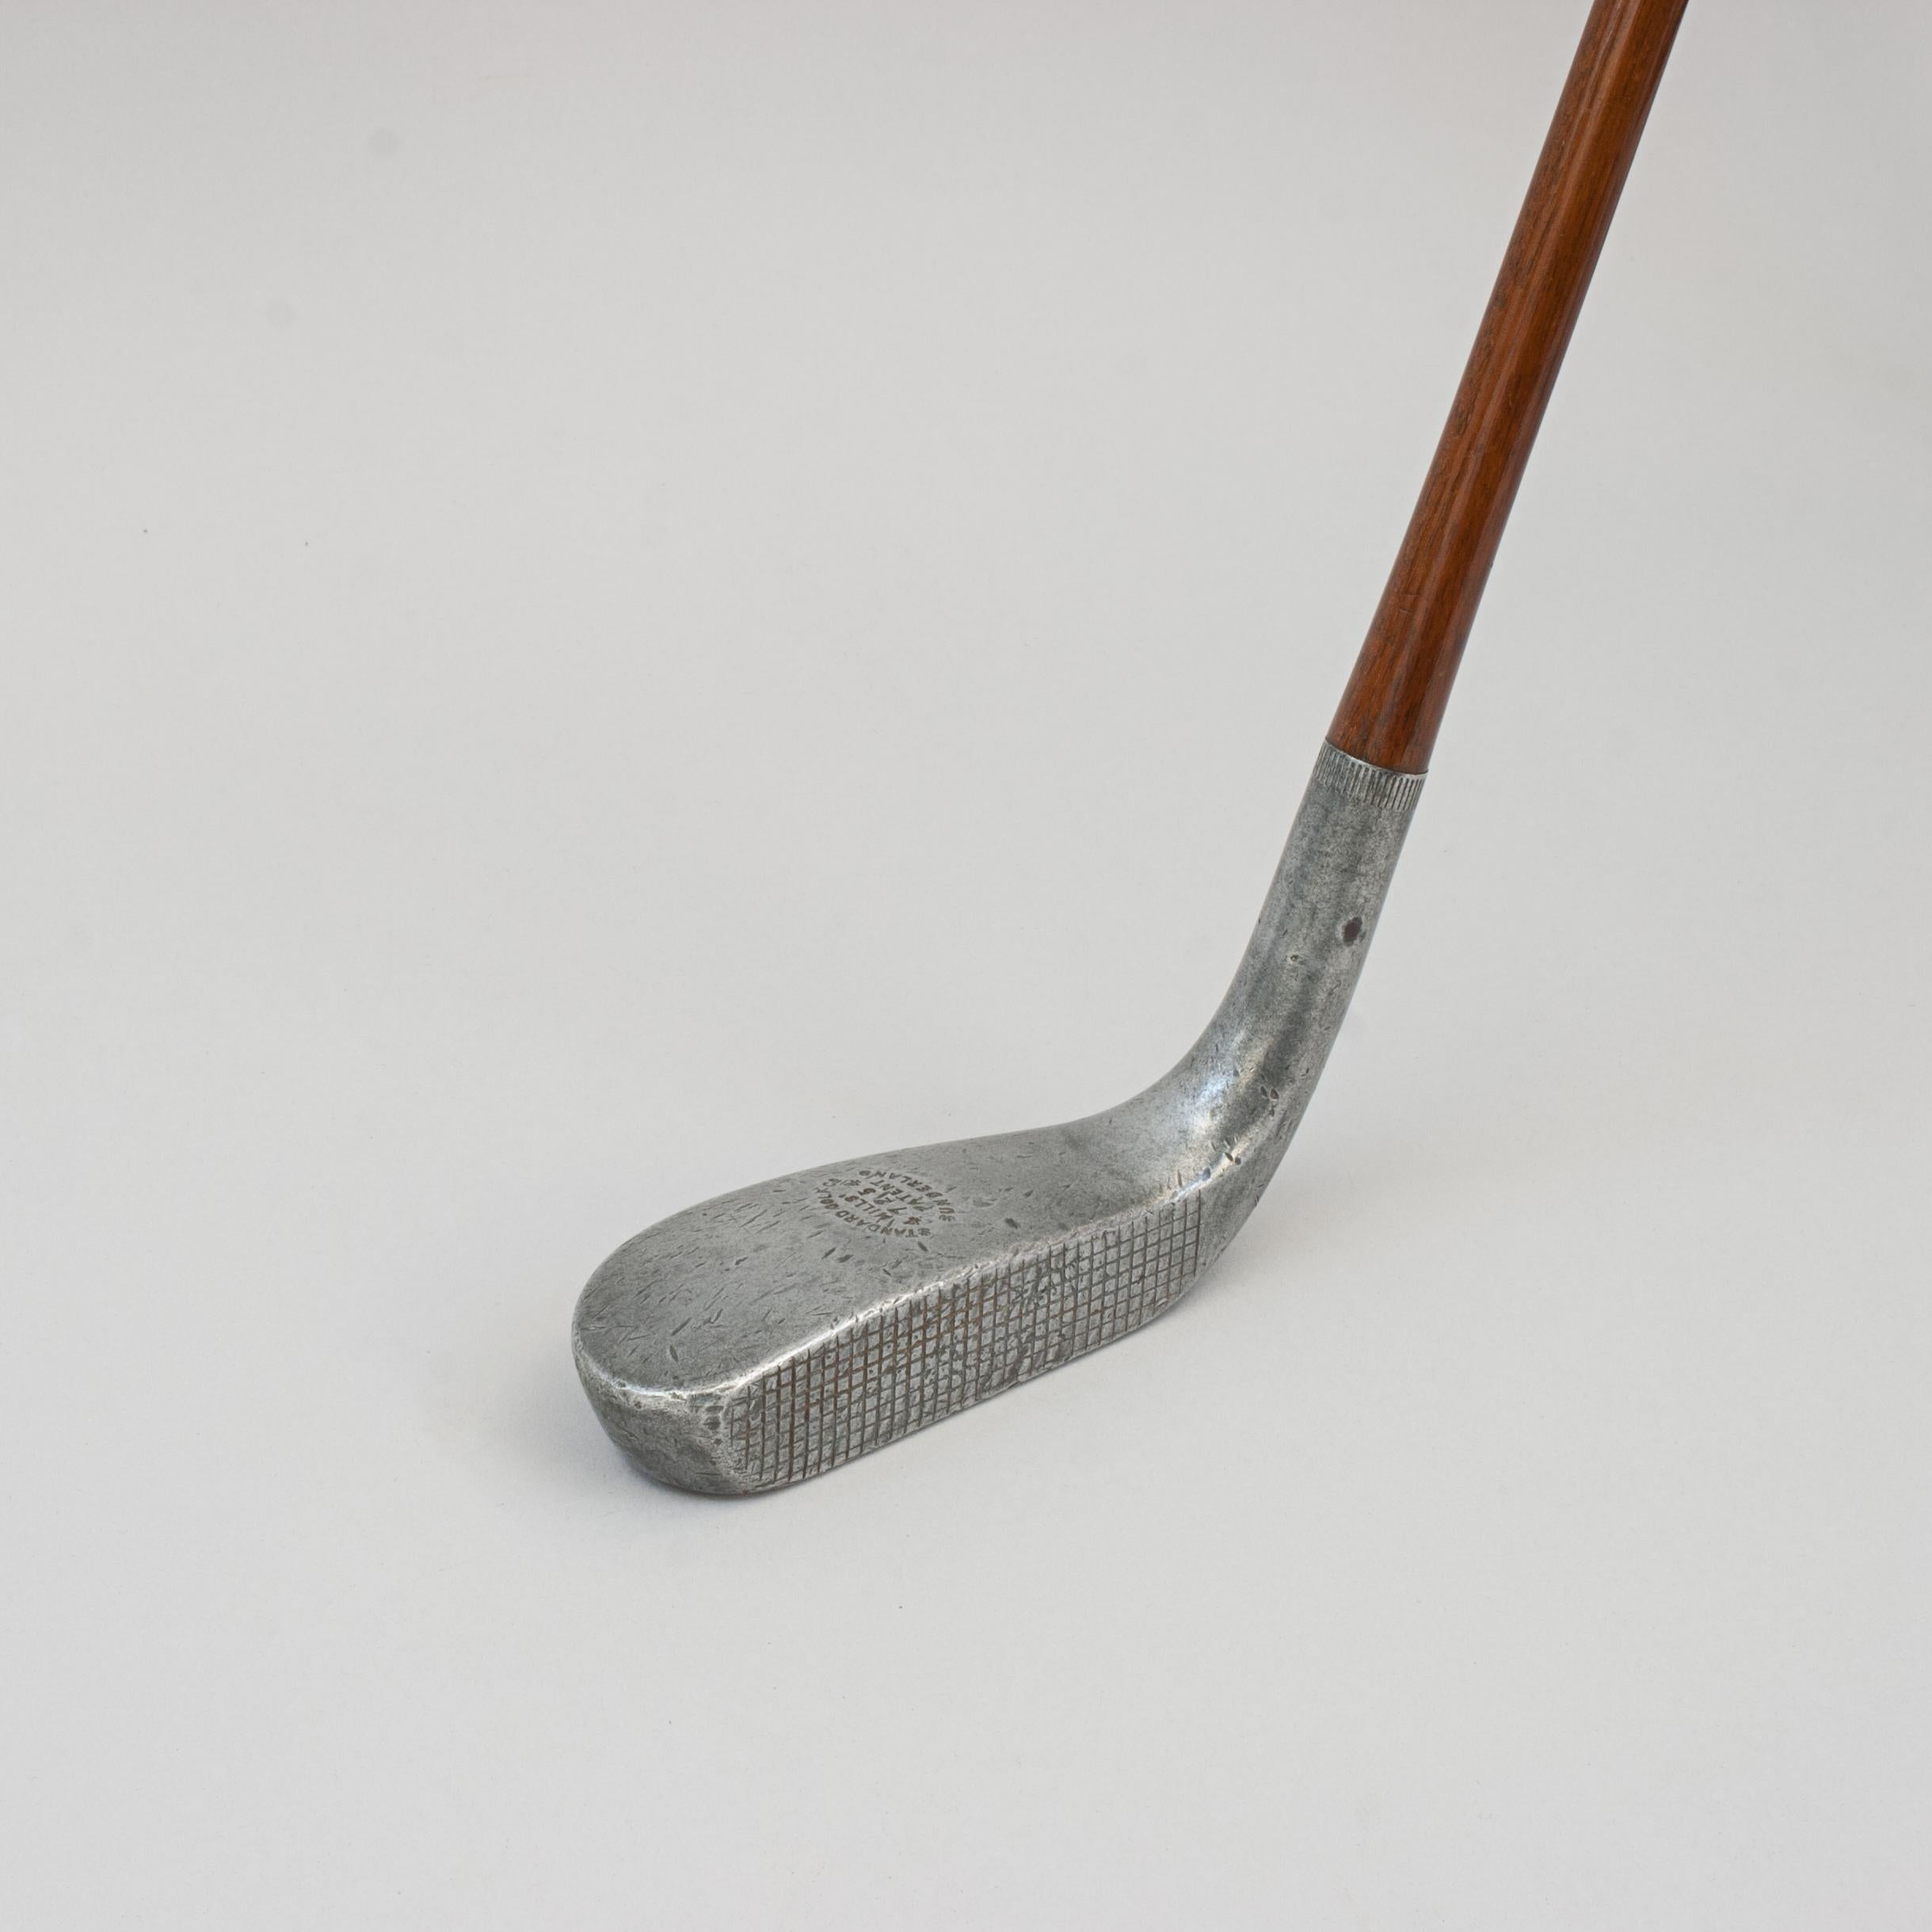 Vintage Hickory Golf Club, Braid Mills Long Nose Putter.
A good example of an aluminium longnose Braid Mills putter by the Standard Golf Co. The top of the head is stamped 'STANDARD GOLF Co., MILLS' 47254, PATENT, SUNDERLAND', whilst the underside